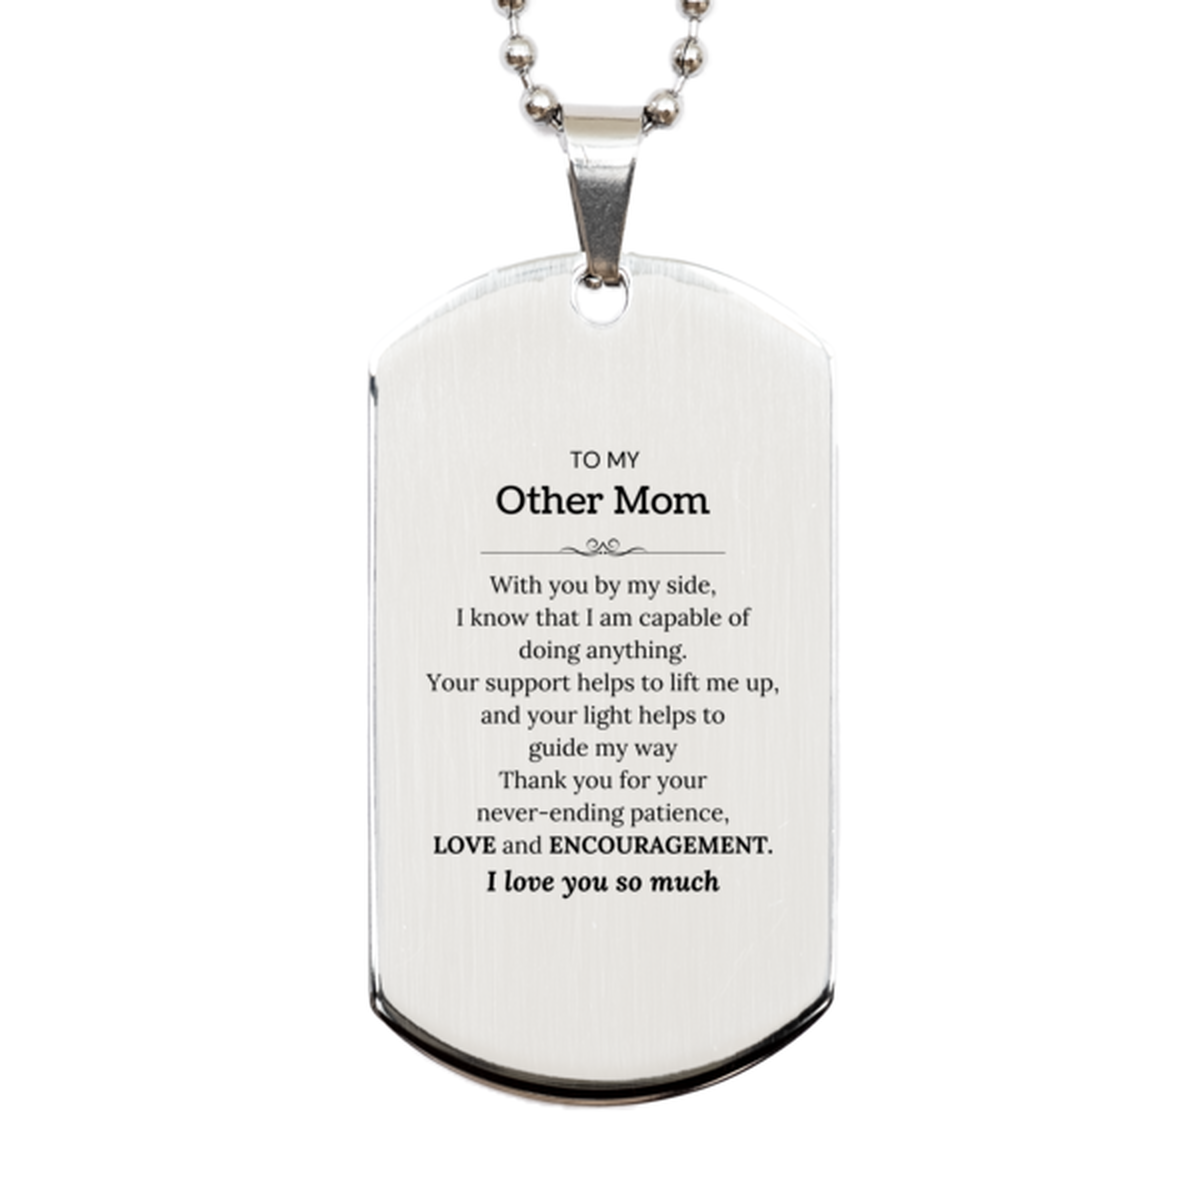 Appreciation Other Mom Silver Dog Tag Gifts, To My Other Mom Birthday Christmas Wedding Keepsake Gifts for Other Mom With you by my side, I know that I am capable of doing anything. I love you so much